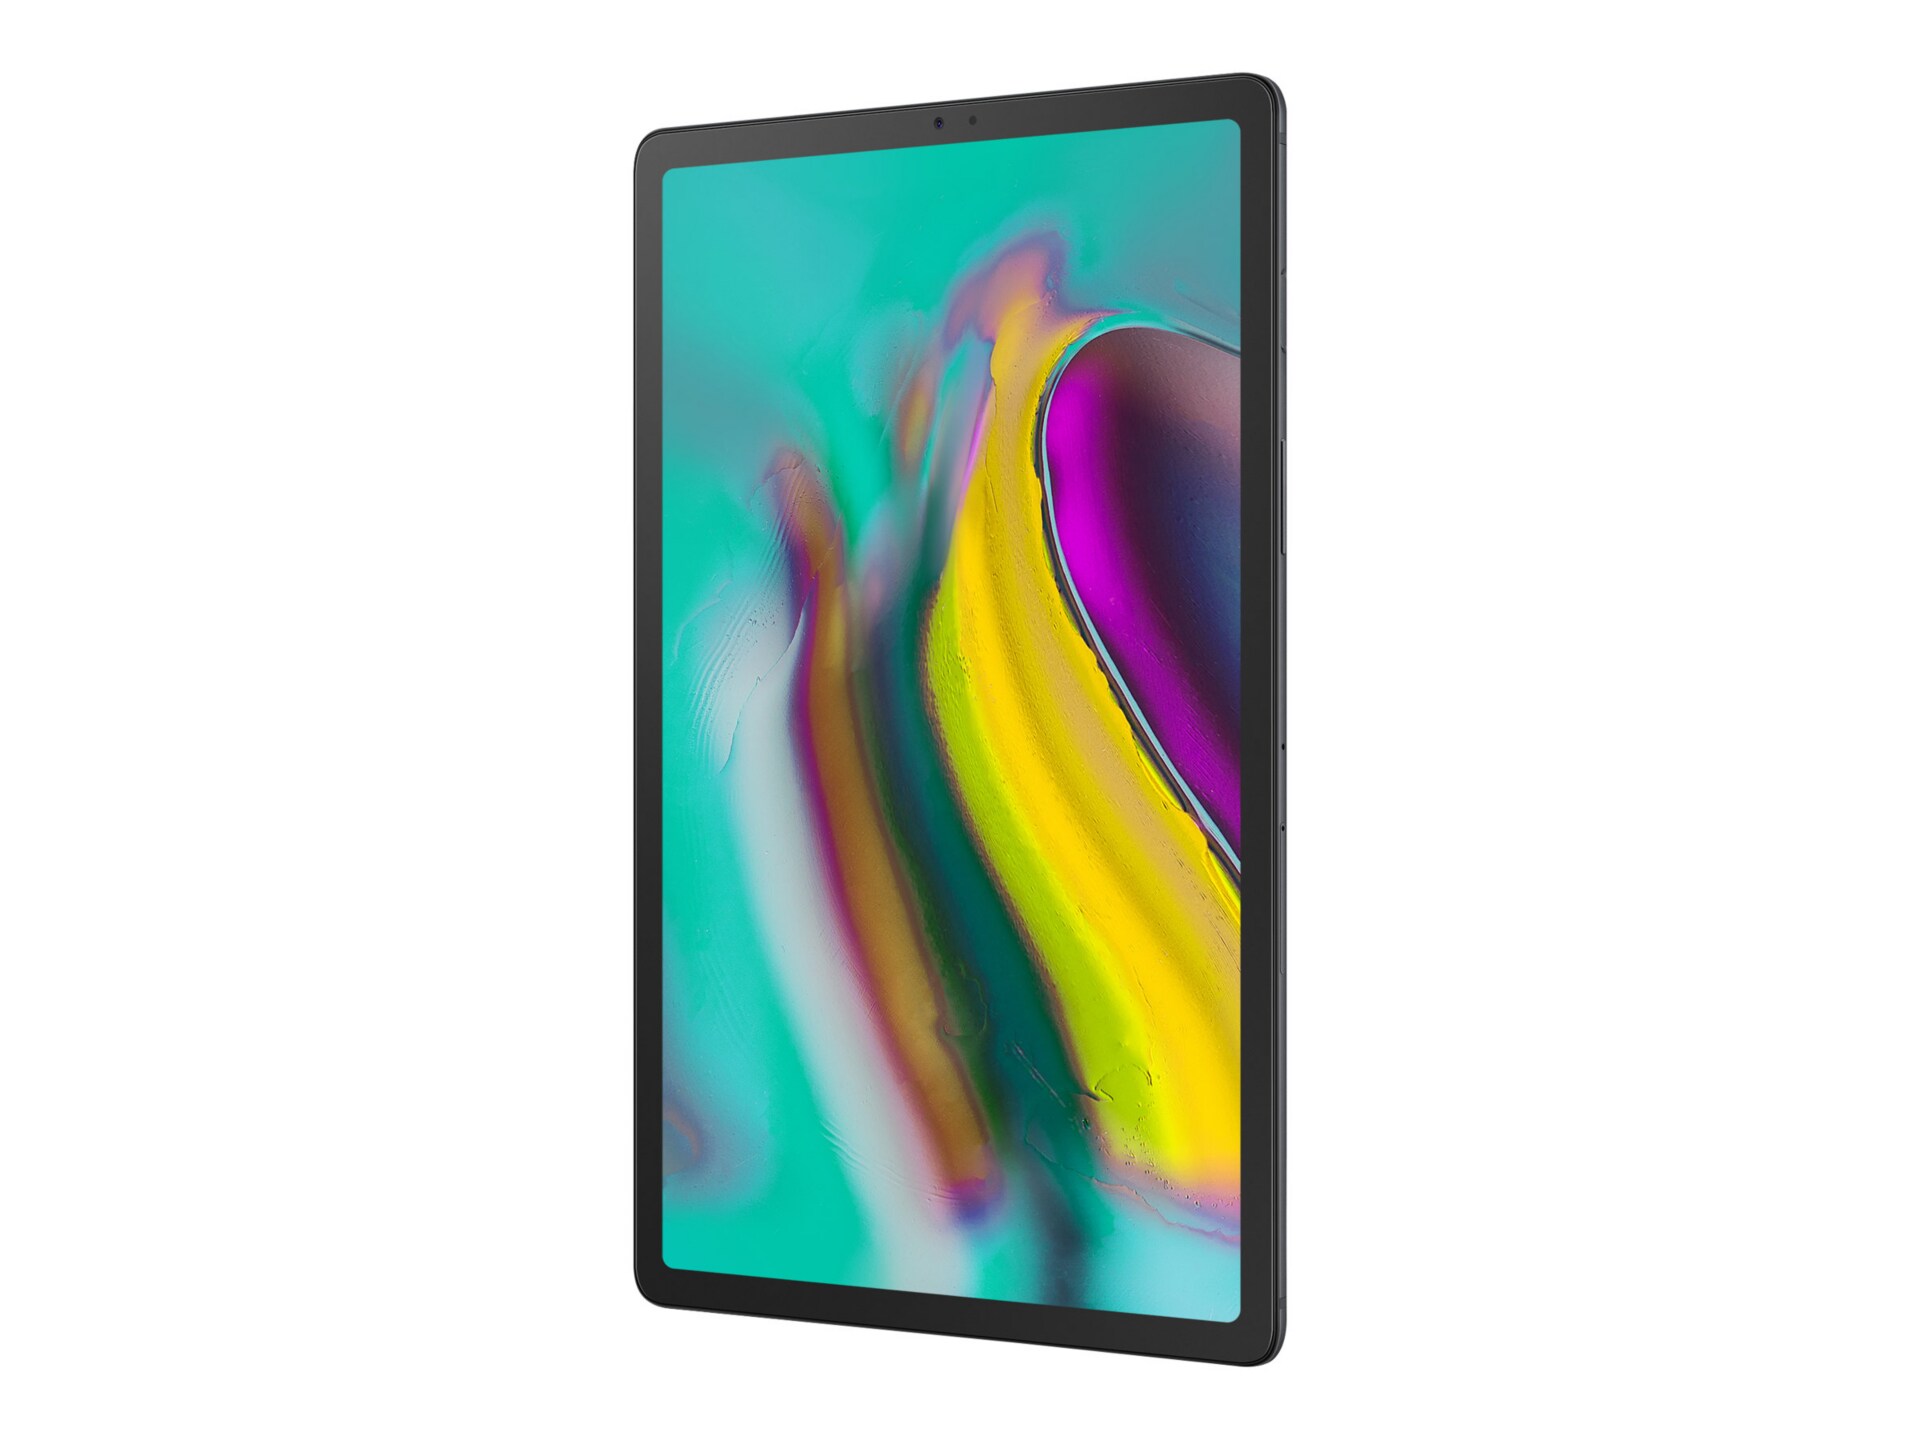 Samsung Galaxy Tab S5e - tablet - Android 9.0 (Pie) - 128 GB - 10.5"